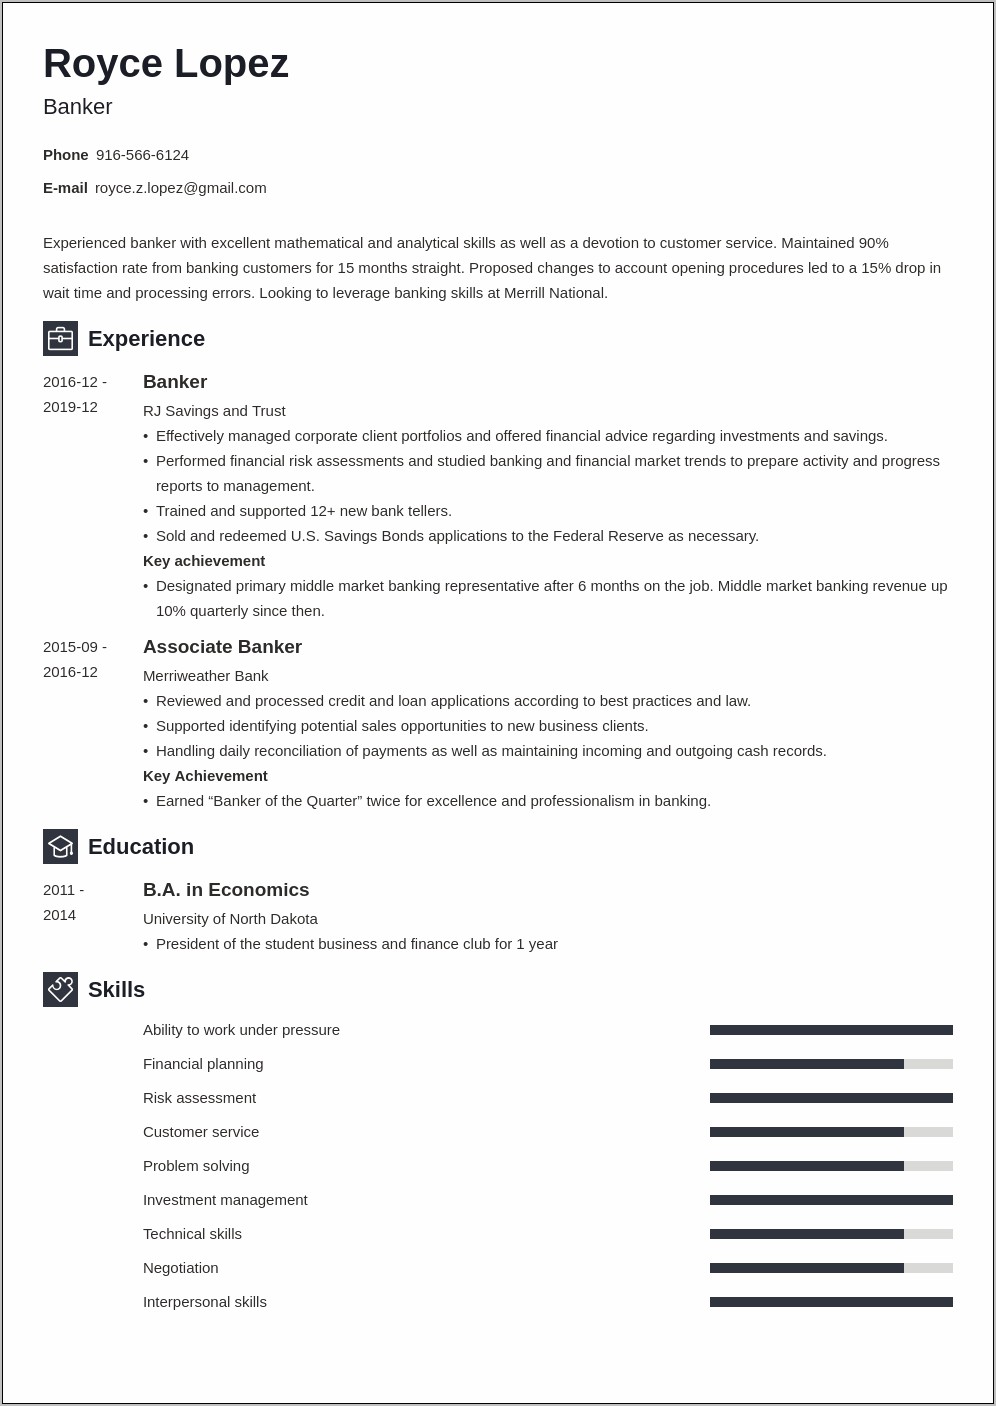 Sample Resume Objective Statement For Banking